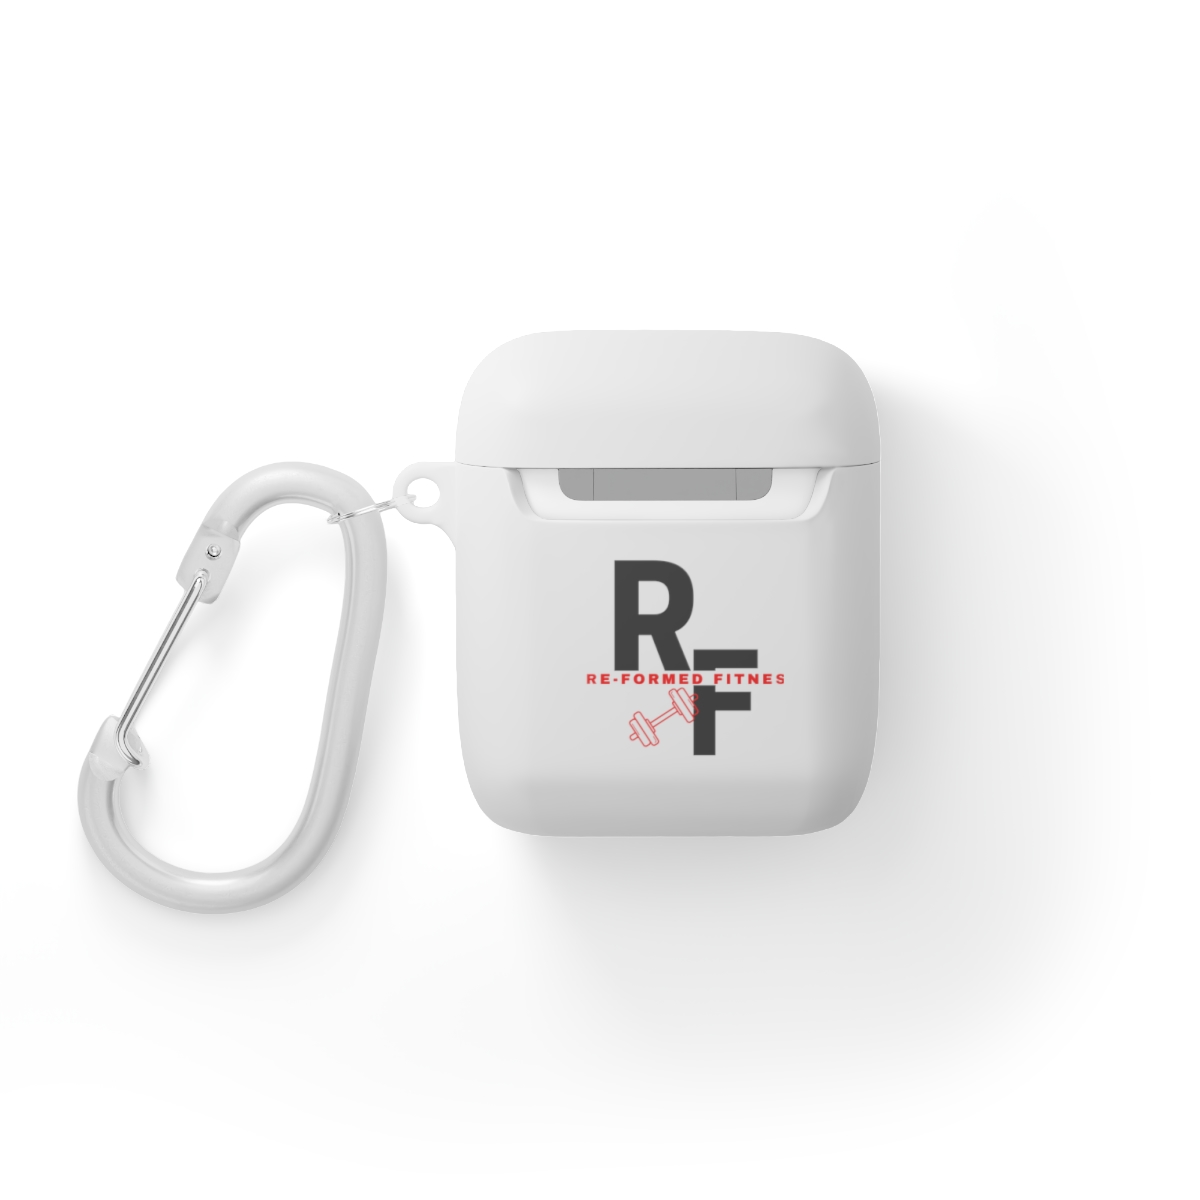 Re-Formed Fitness Brand AirPods/Airpods Pro Case cover product thumbnail image